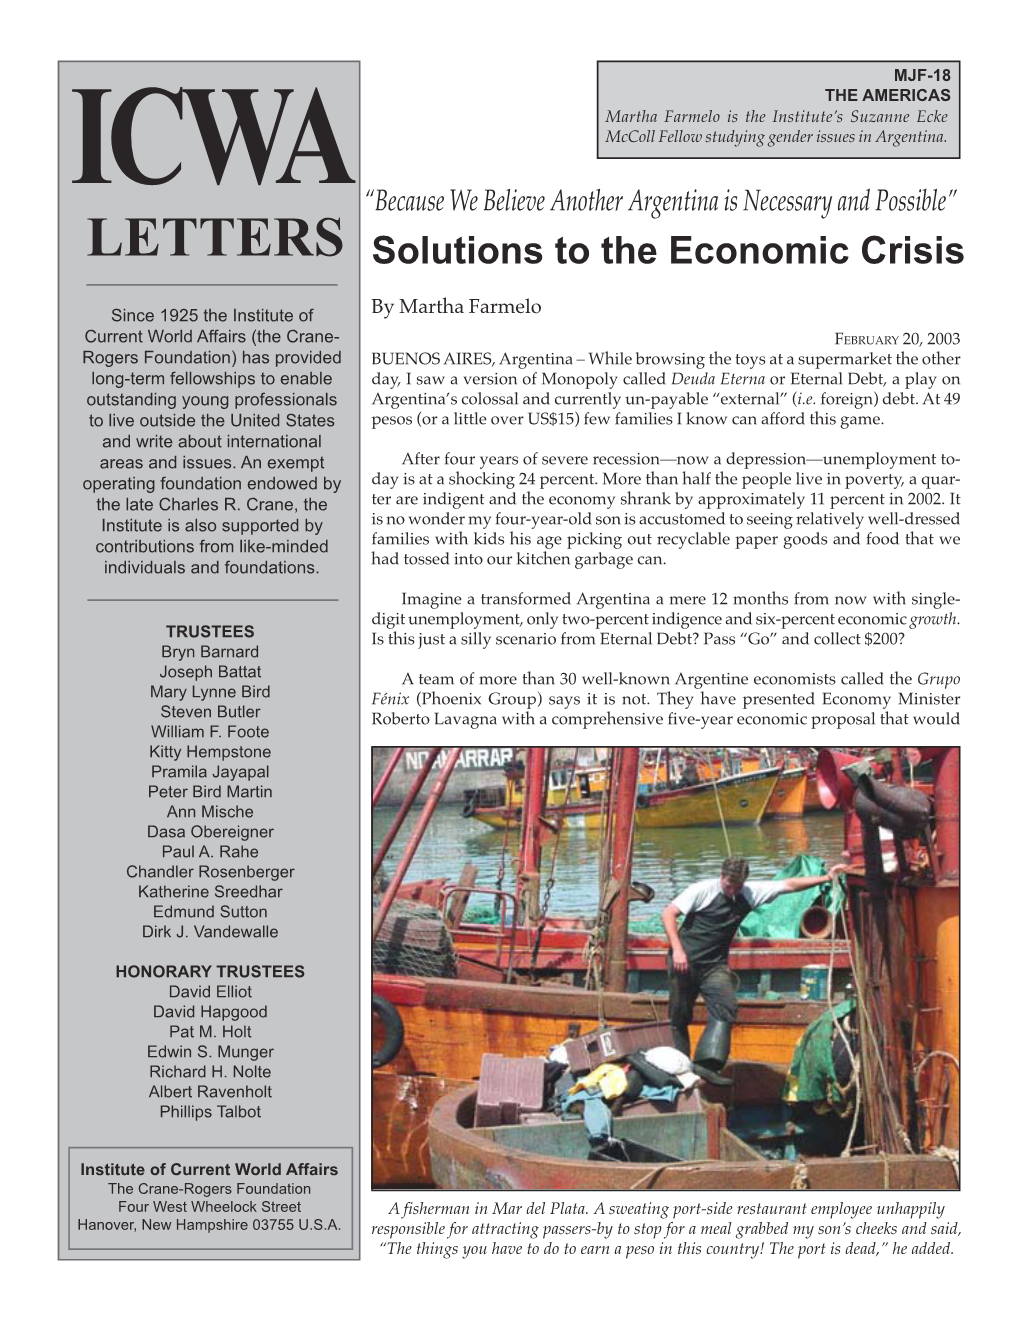 “Because We Believe Another Argentina Is Necessary and Possible” LETTERS Solutions to the Economic Crisis